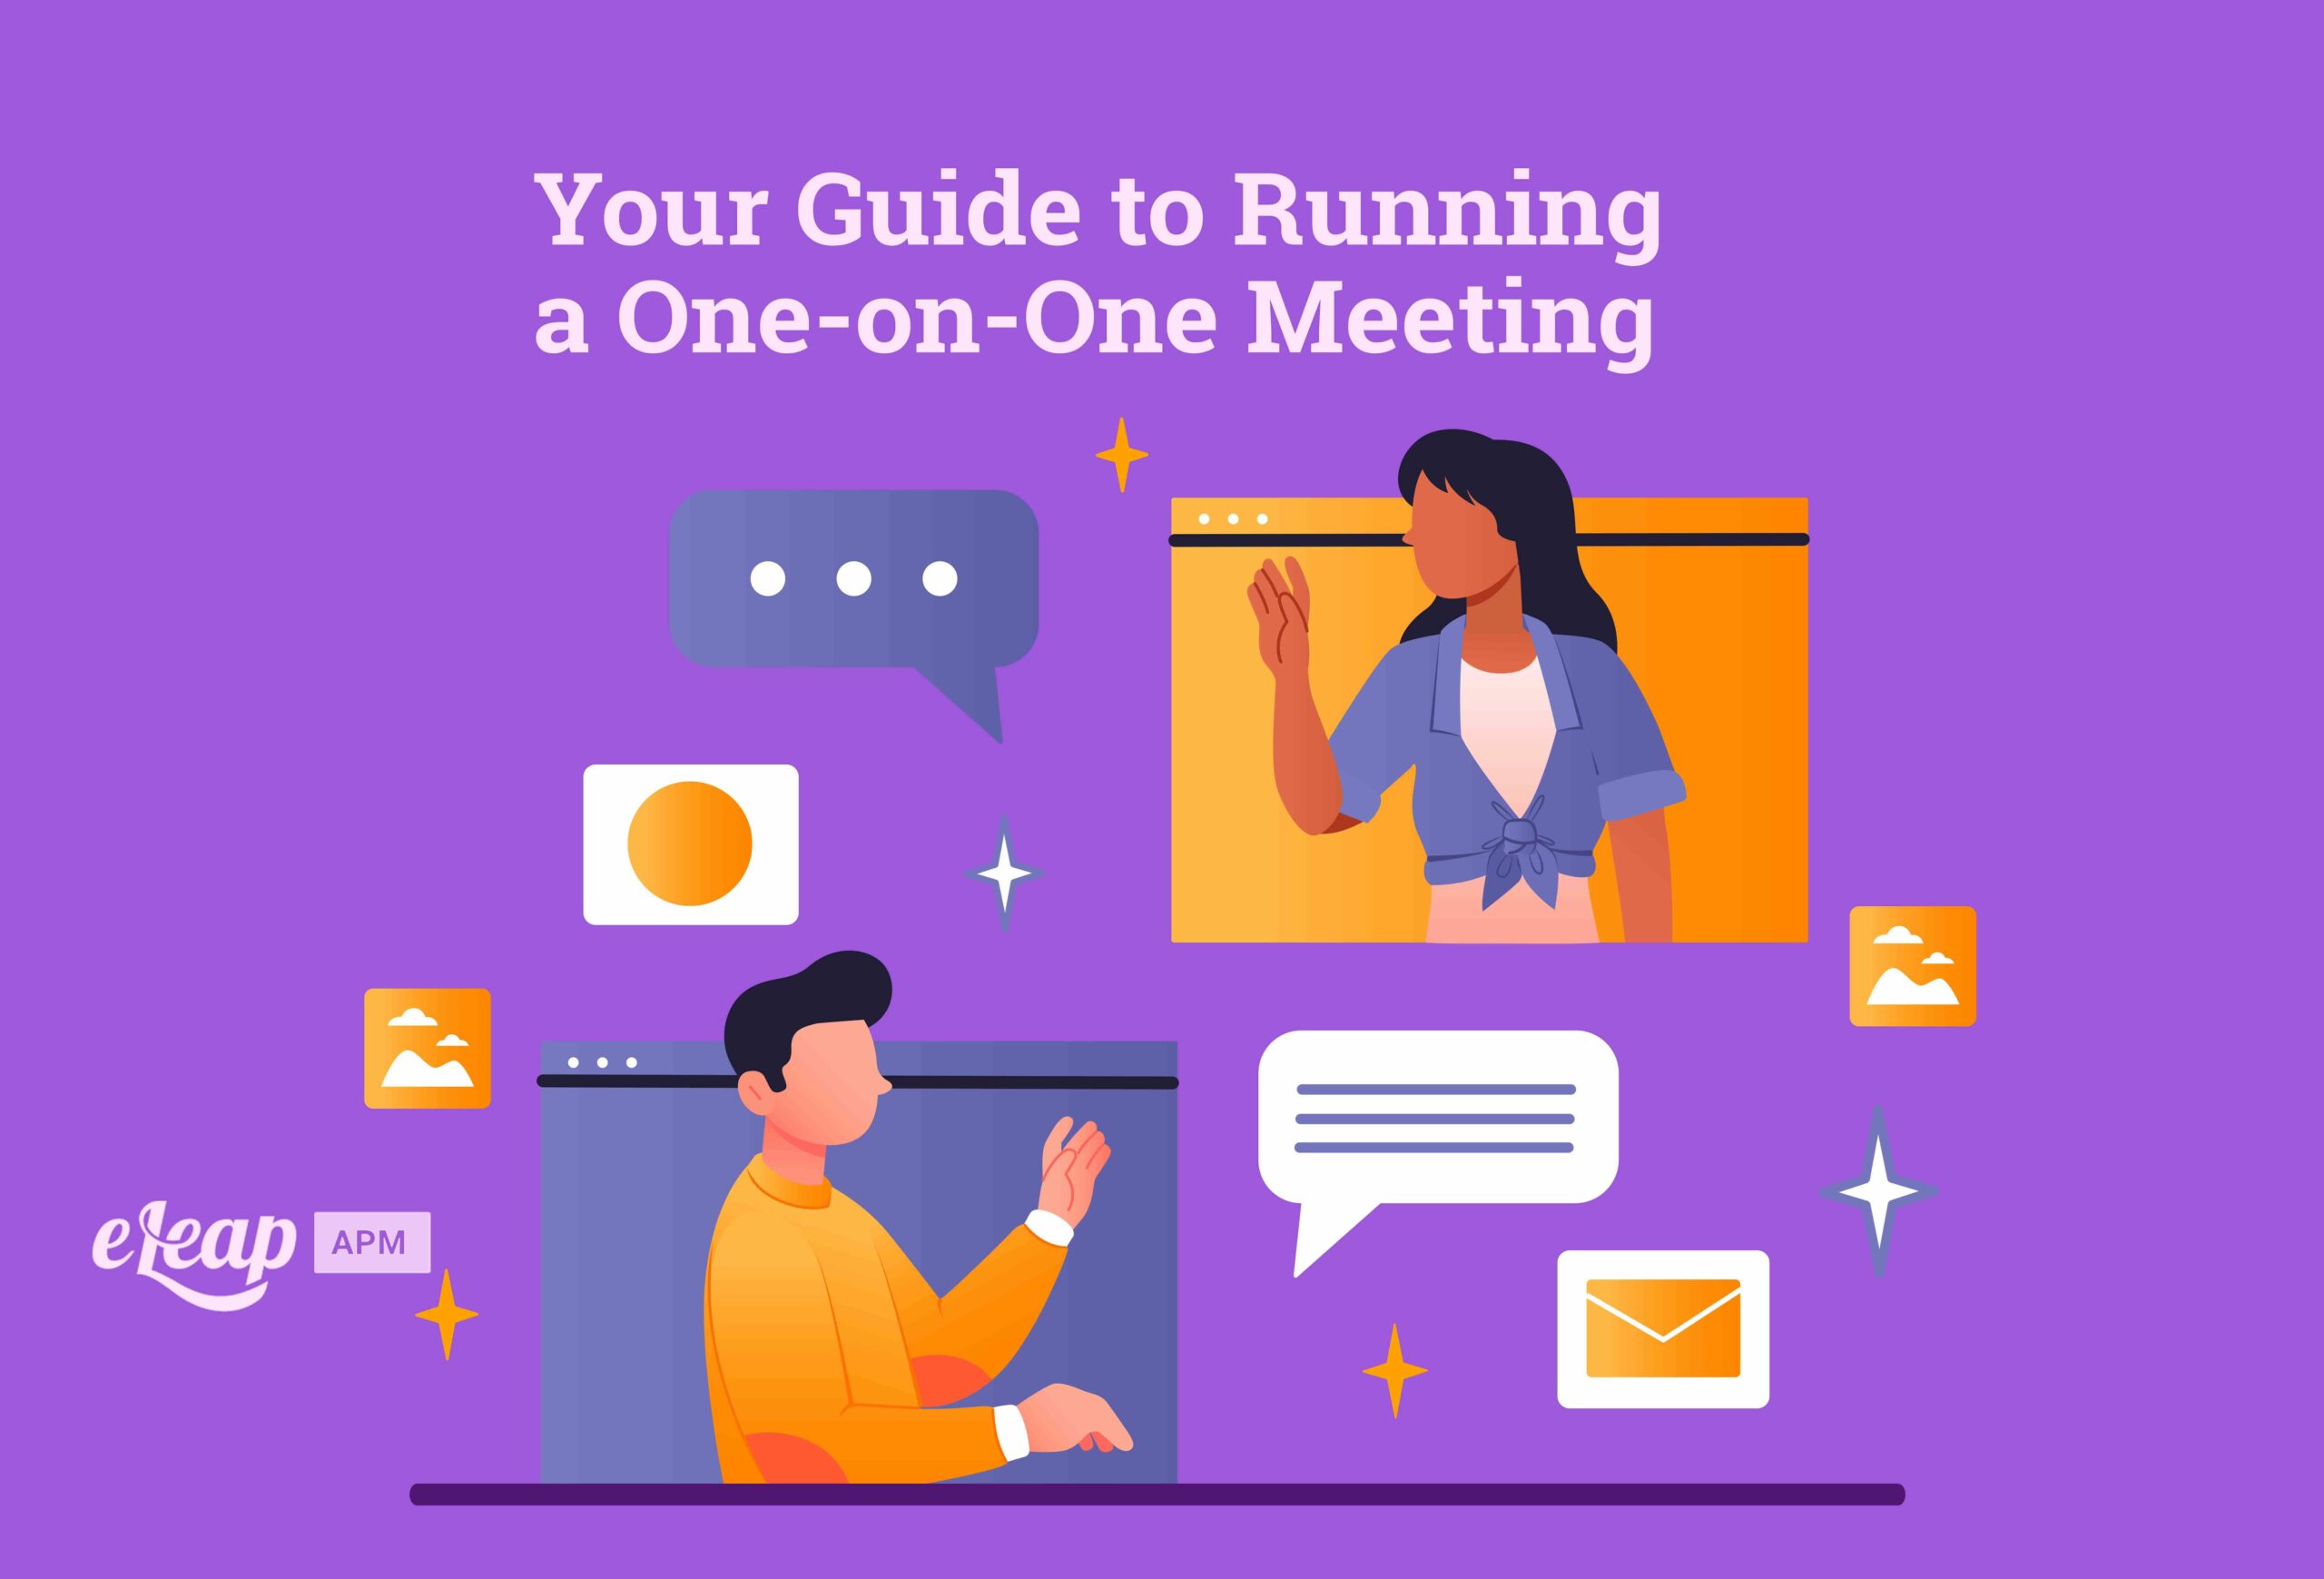 Your Guide to Running a One-on-One Meeting